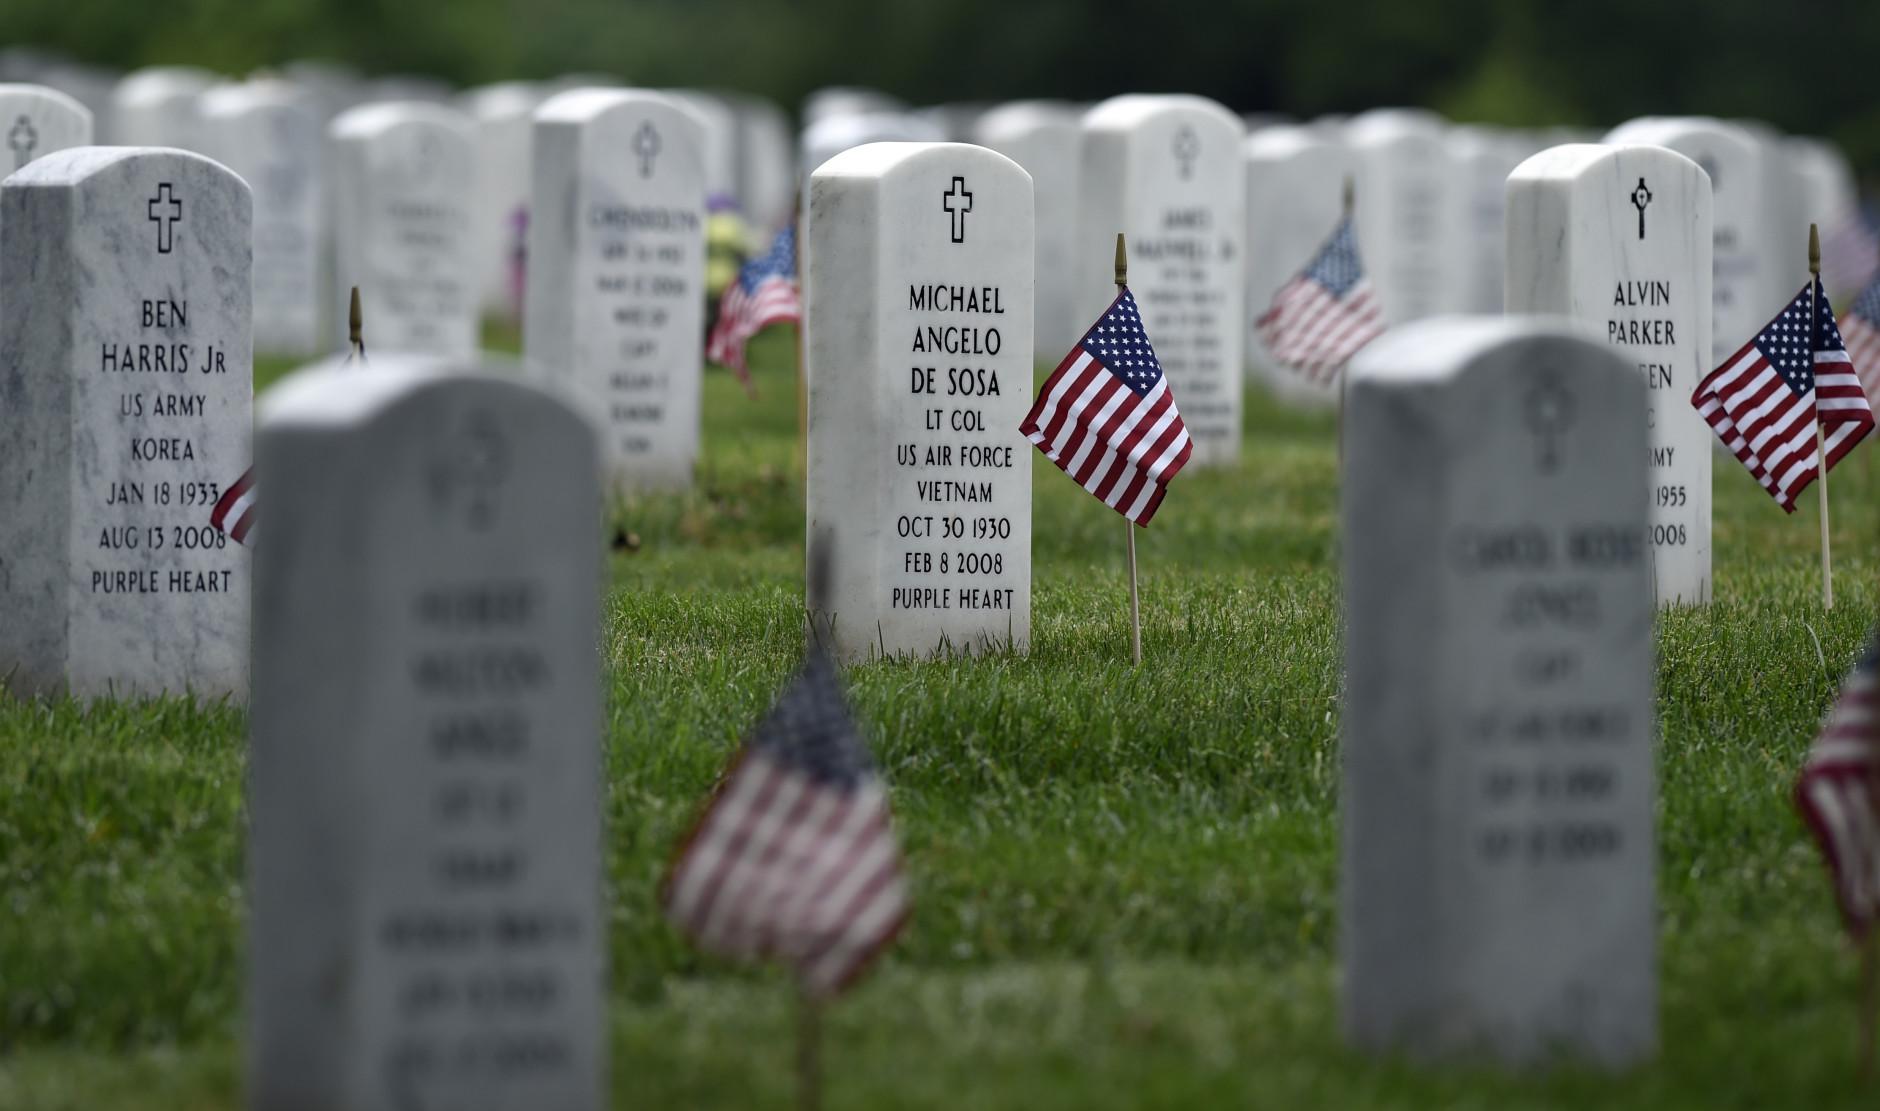 Every headstone at Arlington National Cemetery in Arlington, Va., has a flag placed in front of it, Thursday, May 21, 2015. Flags-In is a time honored tradition that is reserved for Soldiers of the 3rd U.S. Infantry Regiment (The Old Guard).  Since The Old Guards designation as the Armys official ceremonial unit in 1948, they have conducted this mission annually at Arlington National Cemetery prior to Memorial Day to honor our nations fallen military heroes. (AP Photo/Susan Walsh)